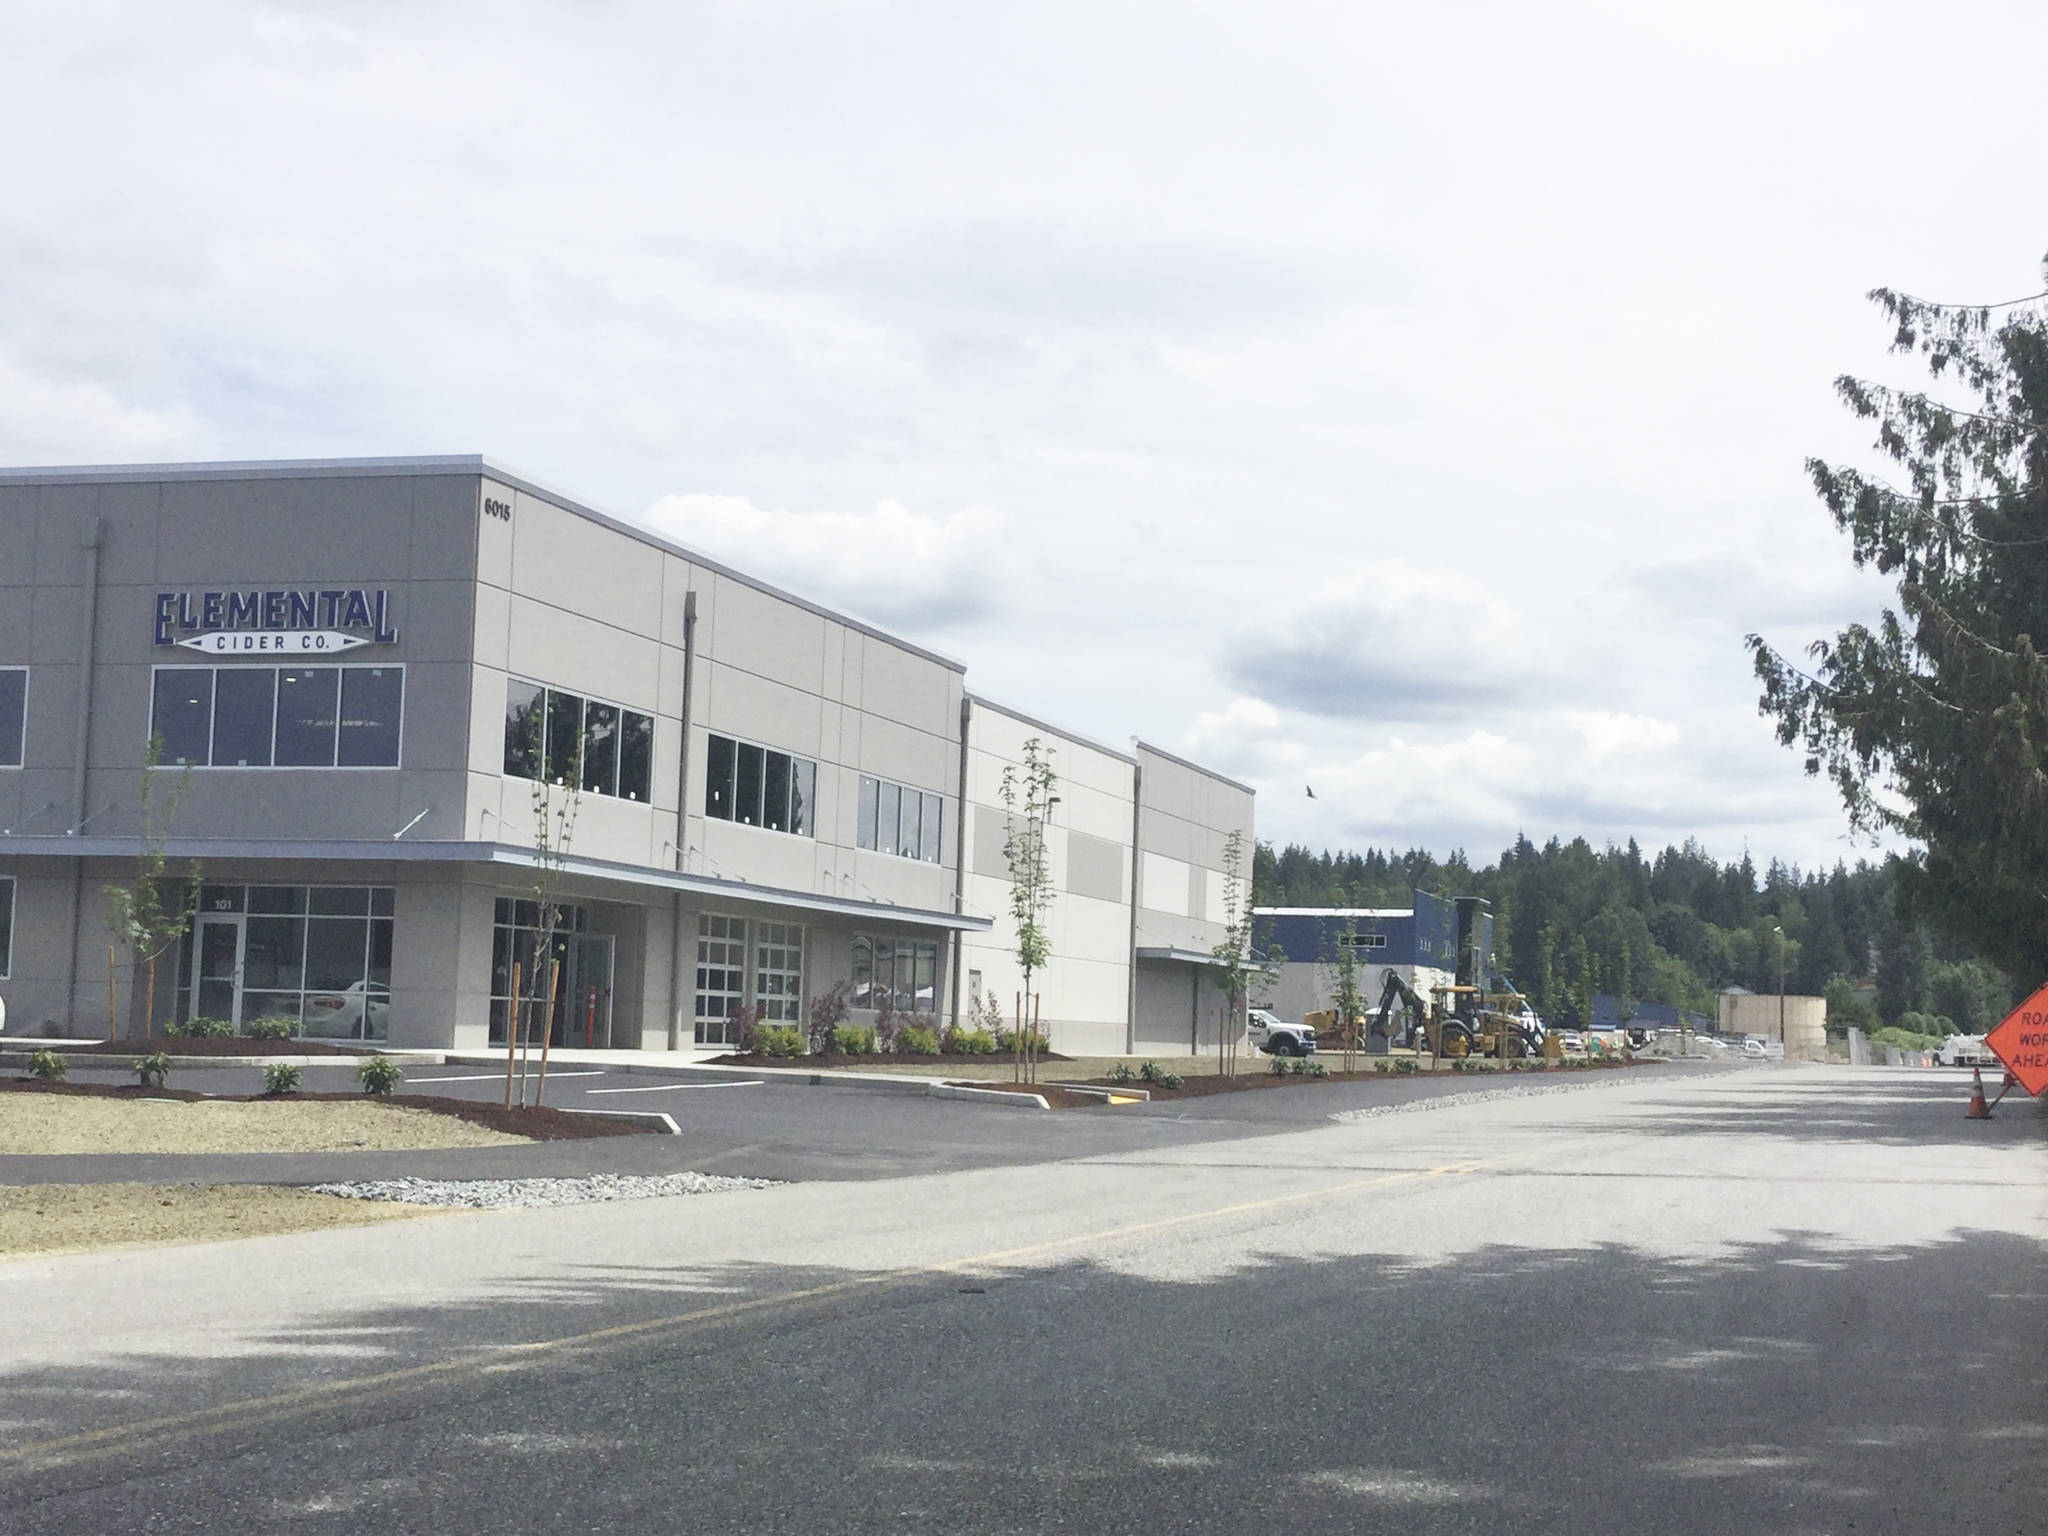 SMARTCAP Opportunity Zone, and Dantrawl, a maritime company, both on 180th Street NE, are two of several manufacturers building in the designated Cascade Industrial Center.